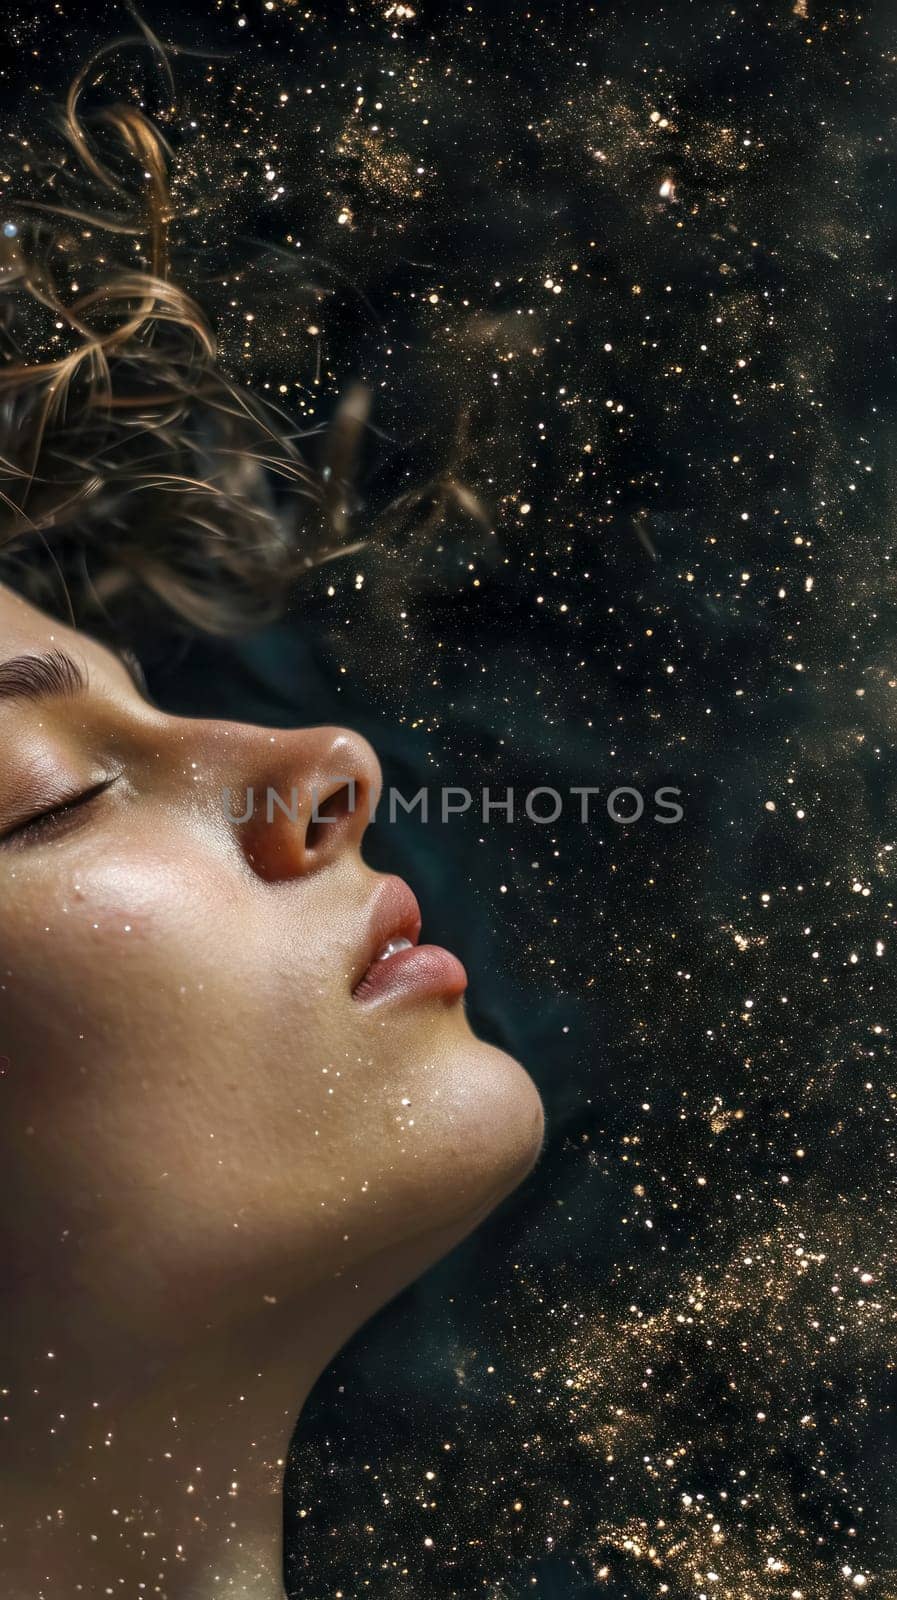 dreamlike scene of a woman's profile with her eyes gently closed, merged with a cosmic backdrop filled with stars, suggesting a peaceful slumber under a starry sky. by Edophoto